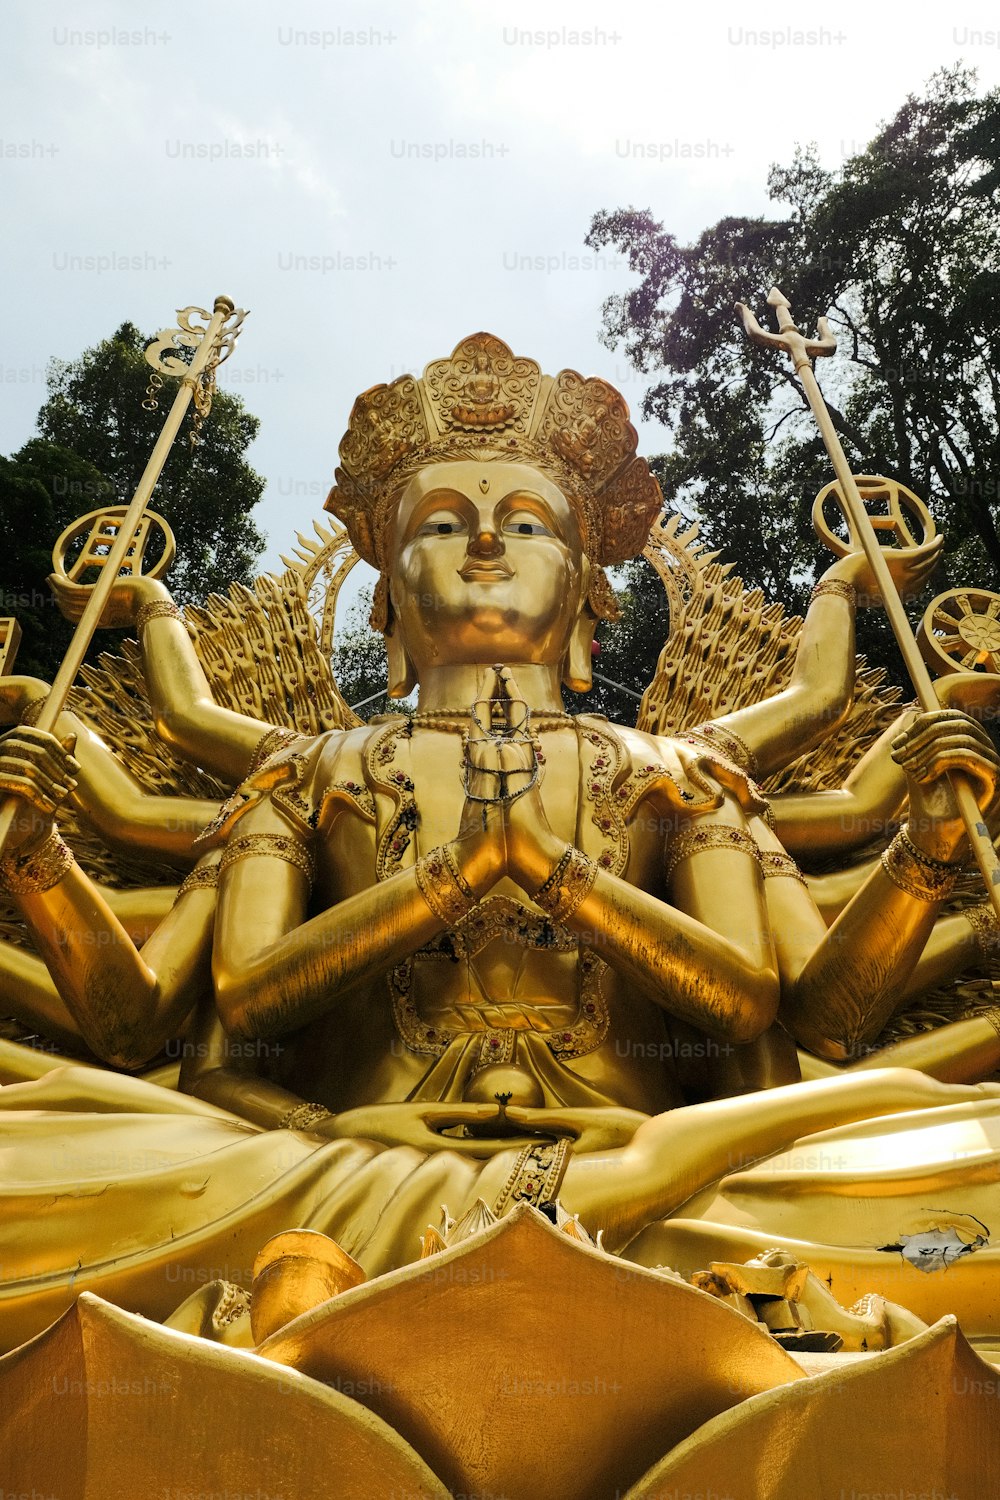 a golden statue of a person holding two swords